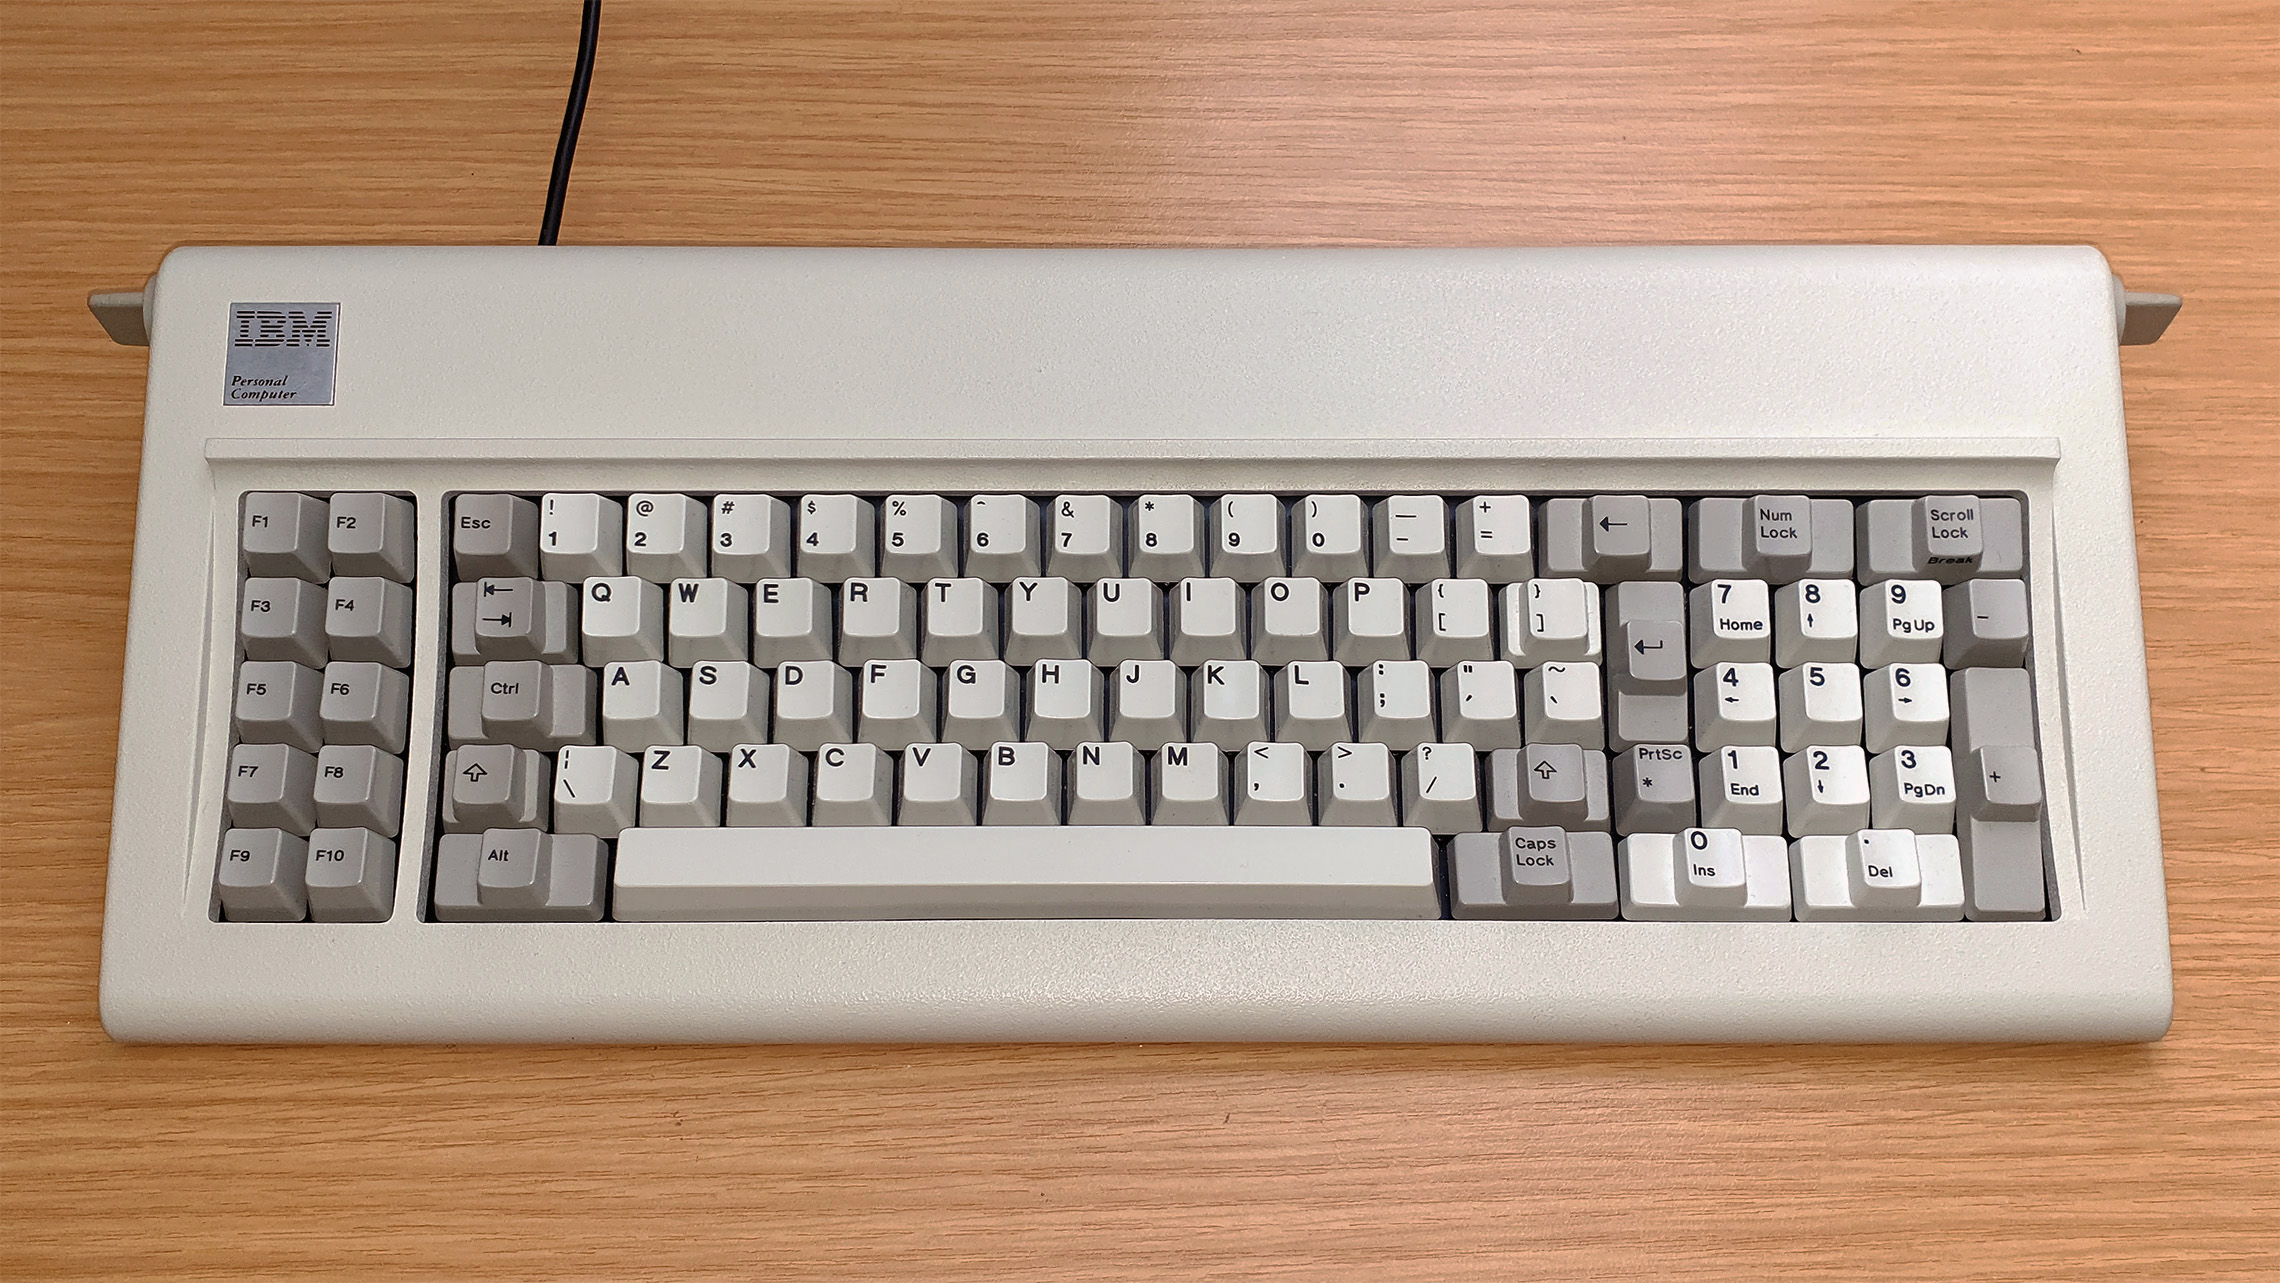 IBM Personal Computer Keyboard<a class='source-link' href='/wiki?id=modelf#Sources'><sup>[ASK]</sup></a>